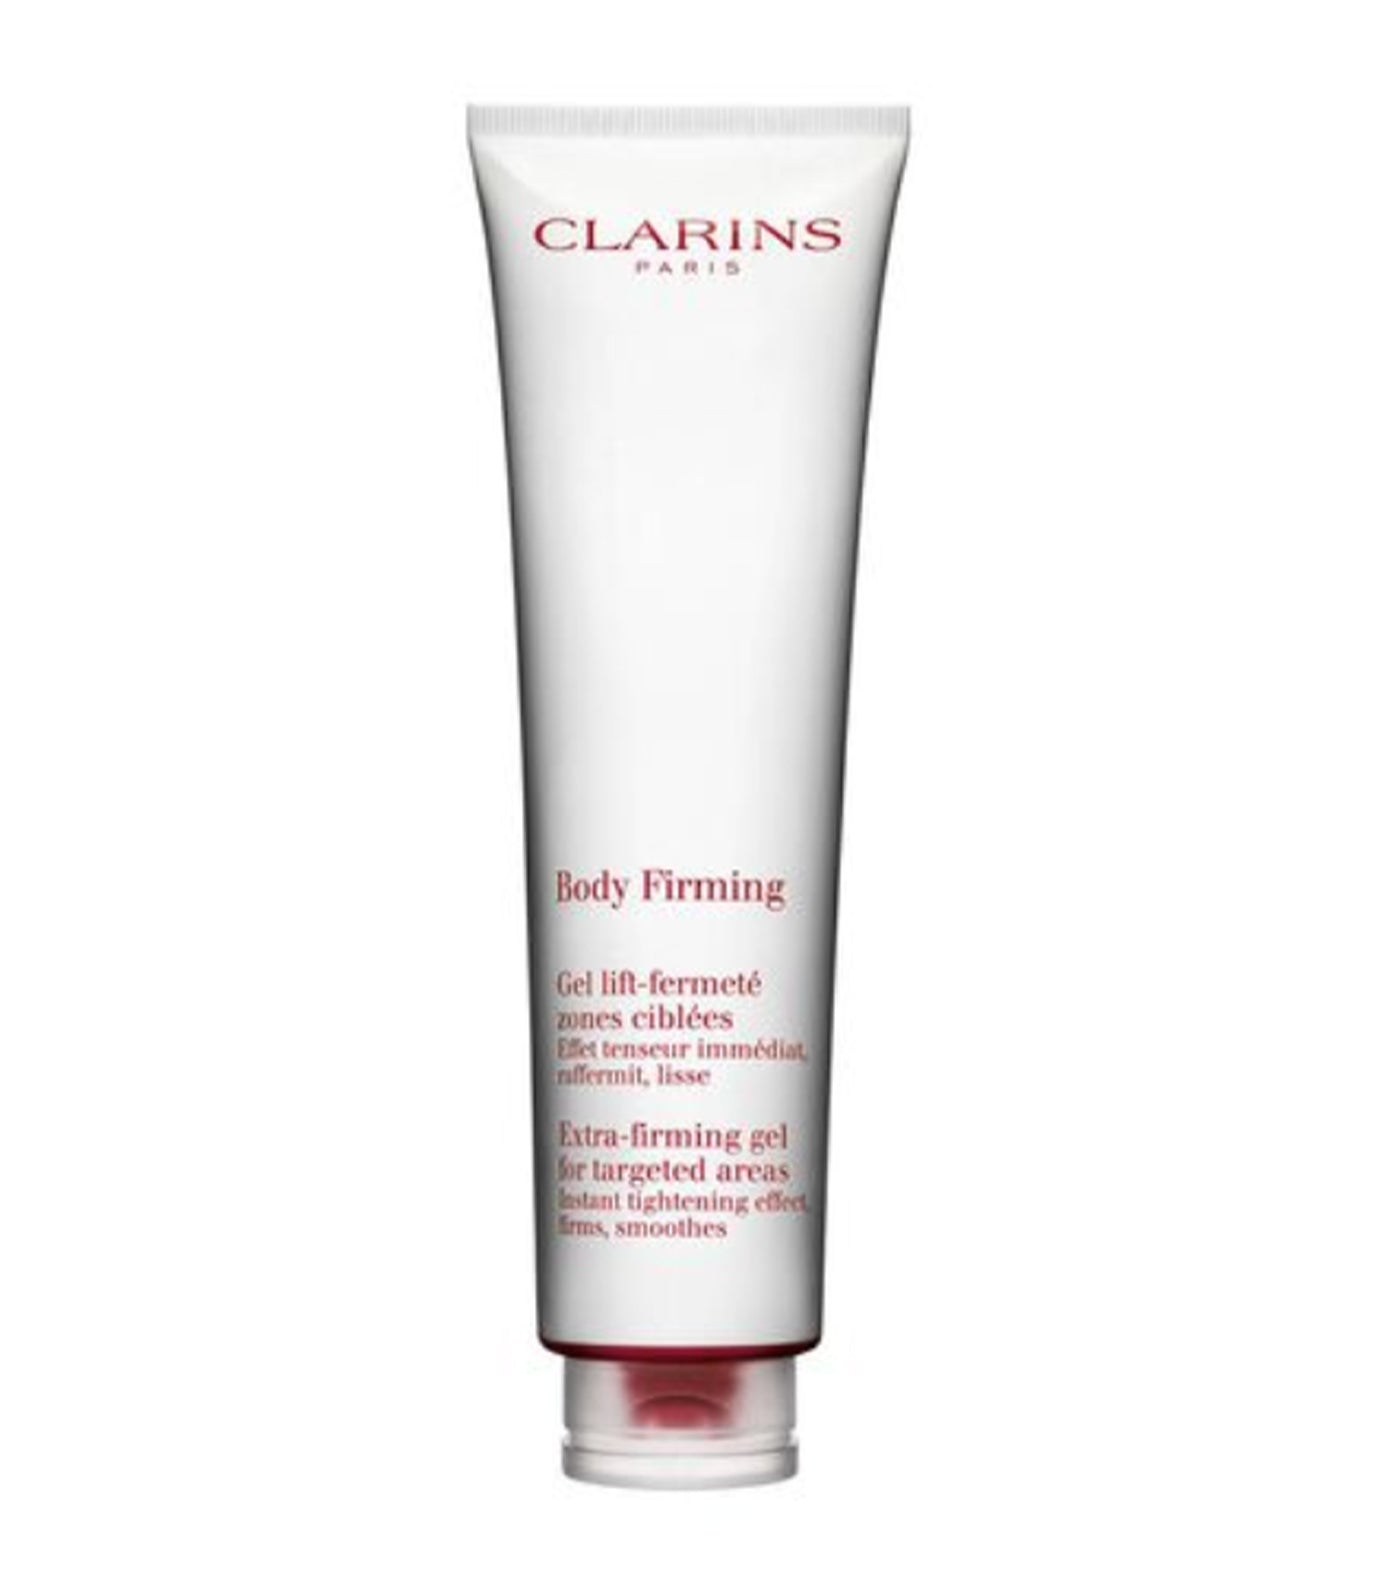 Clarins Body Fit Anti-Cellulite Contouring Expert for Women, 6.9